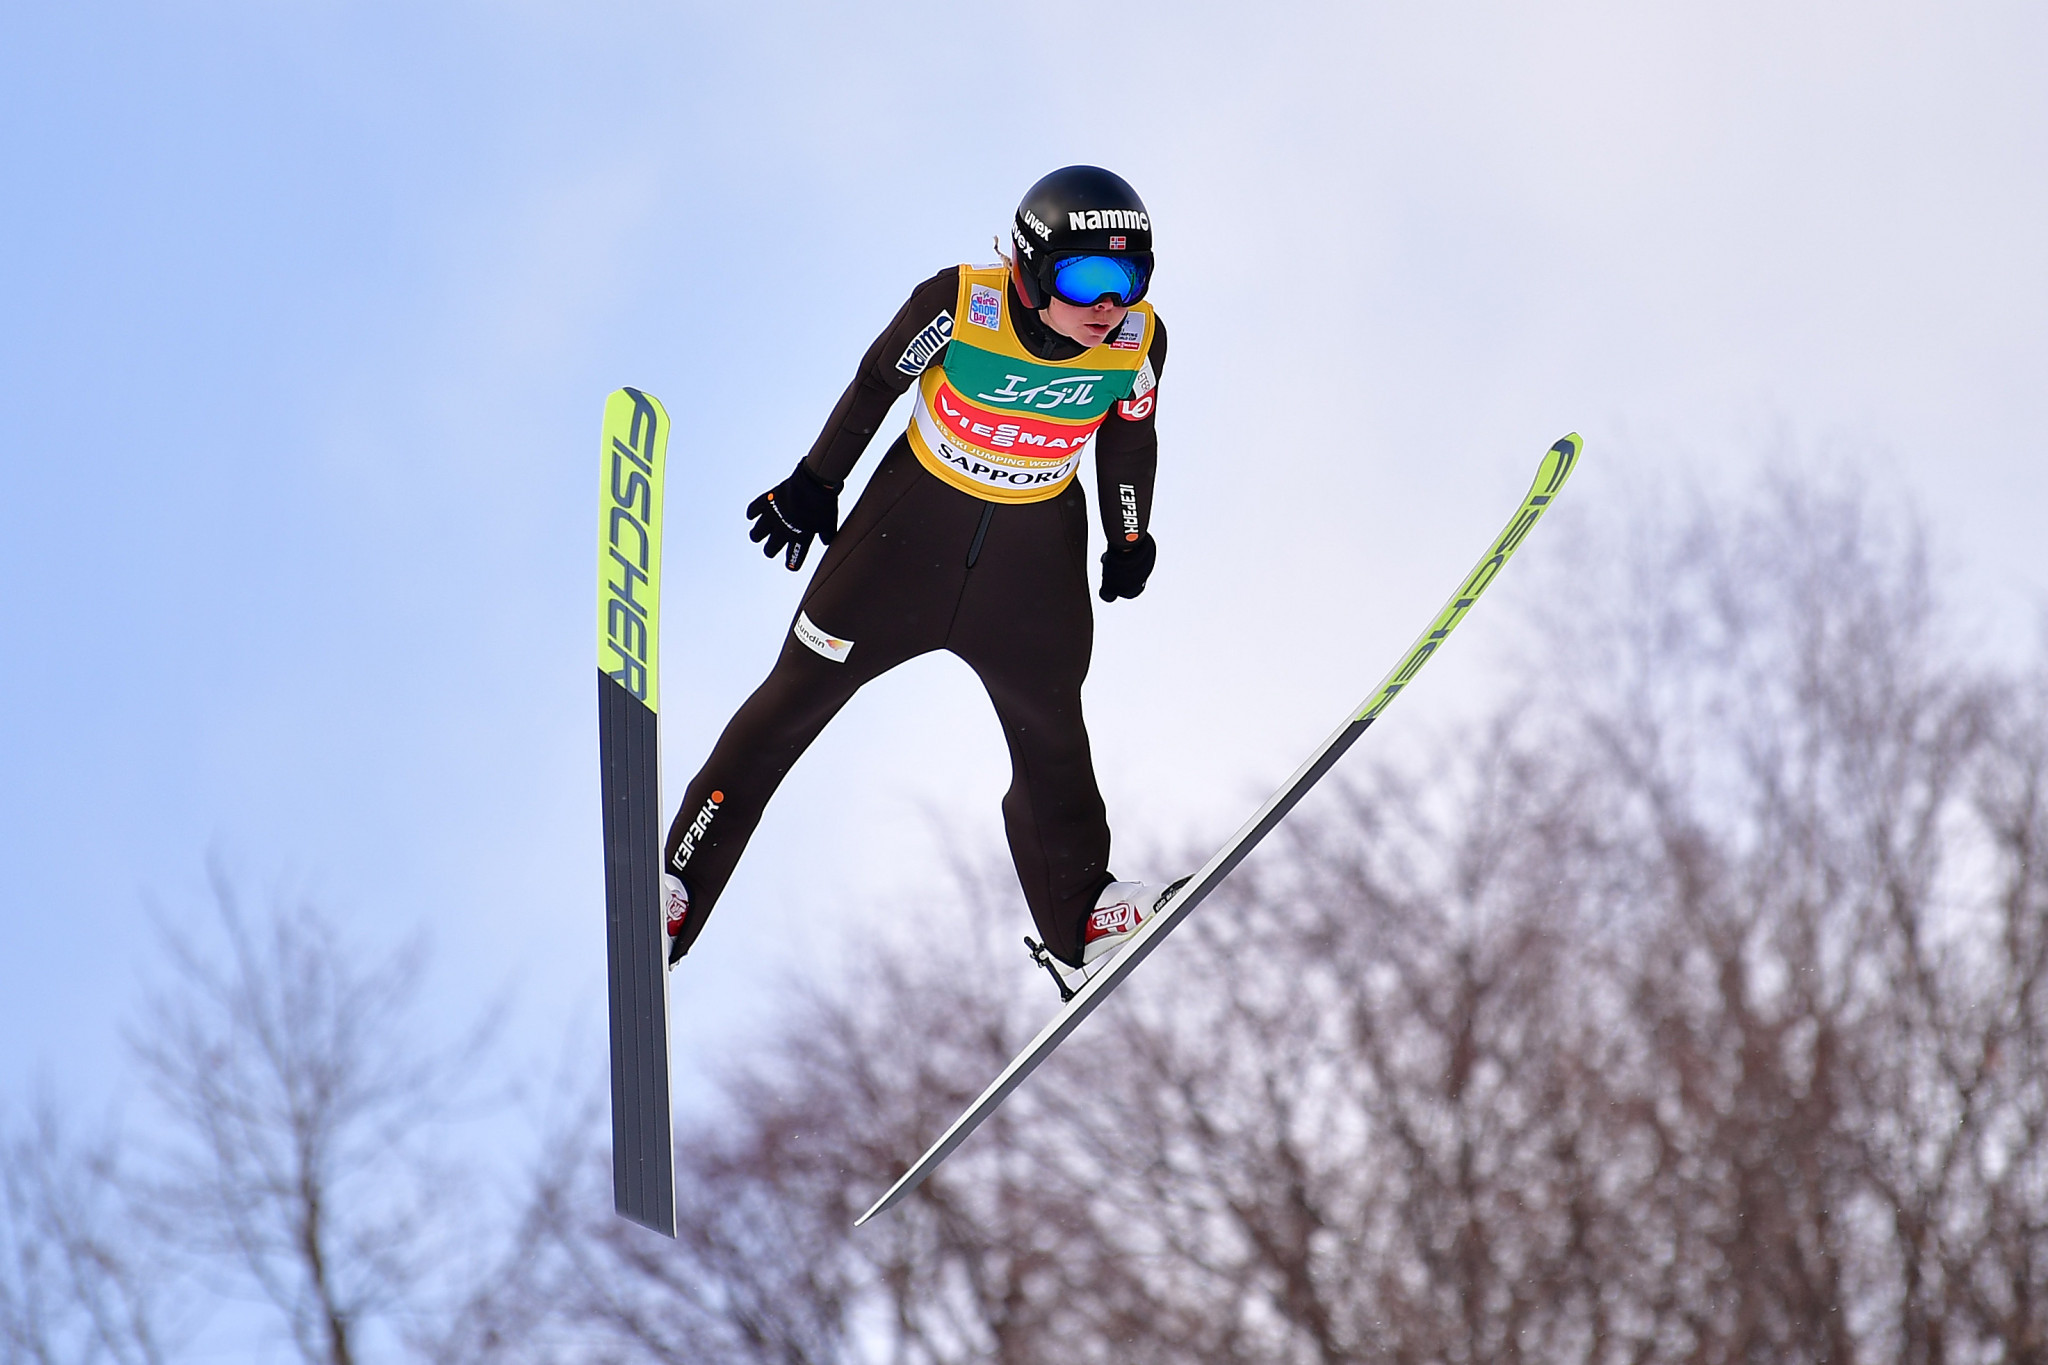 Maren Lundby of Norway is set to defend her title at the International Ski Federation Ski Jumping World Cup event in of Zao ©Getty Images